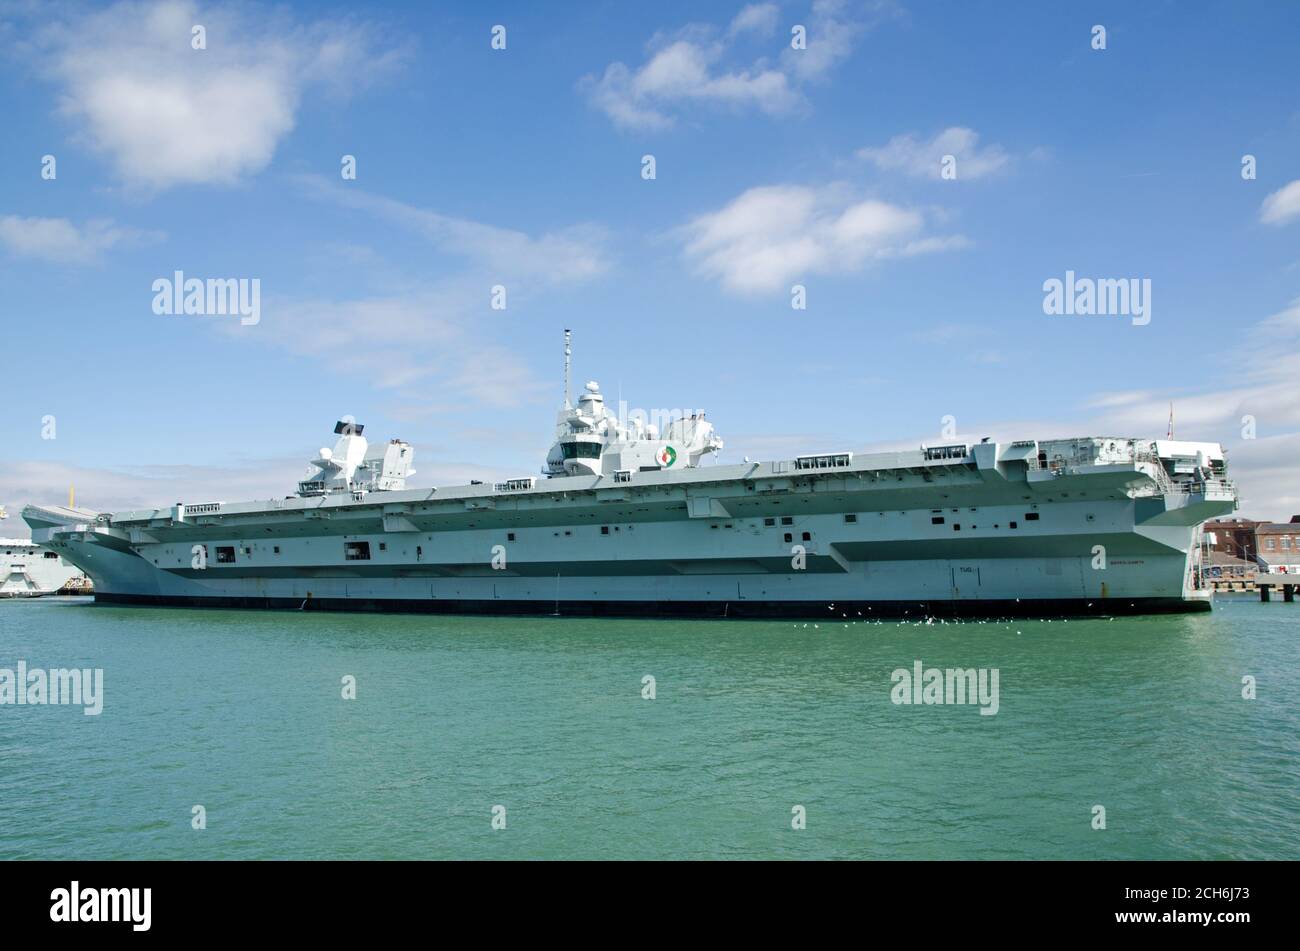 Portsmouth, UK - September 8, 2020: View of the full length of the huge Royal Navy aircraft carrier - Queen Elizabeth.  Moored in Portsmouth Harbour, Stock Photo